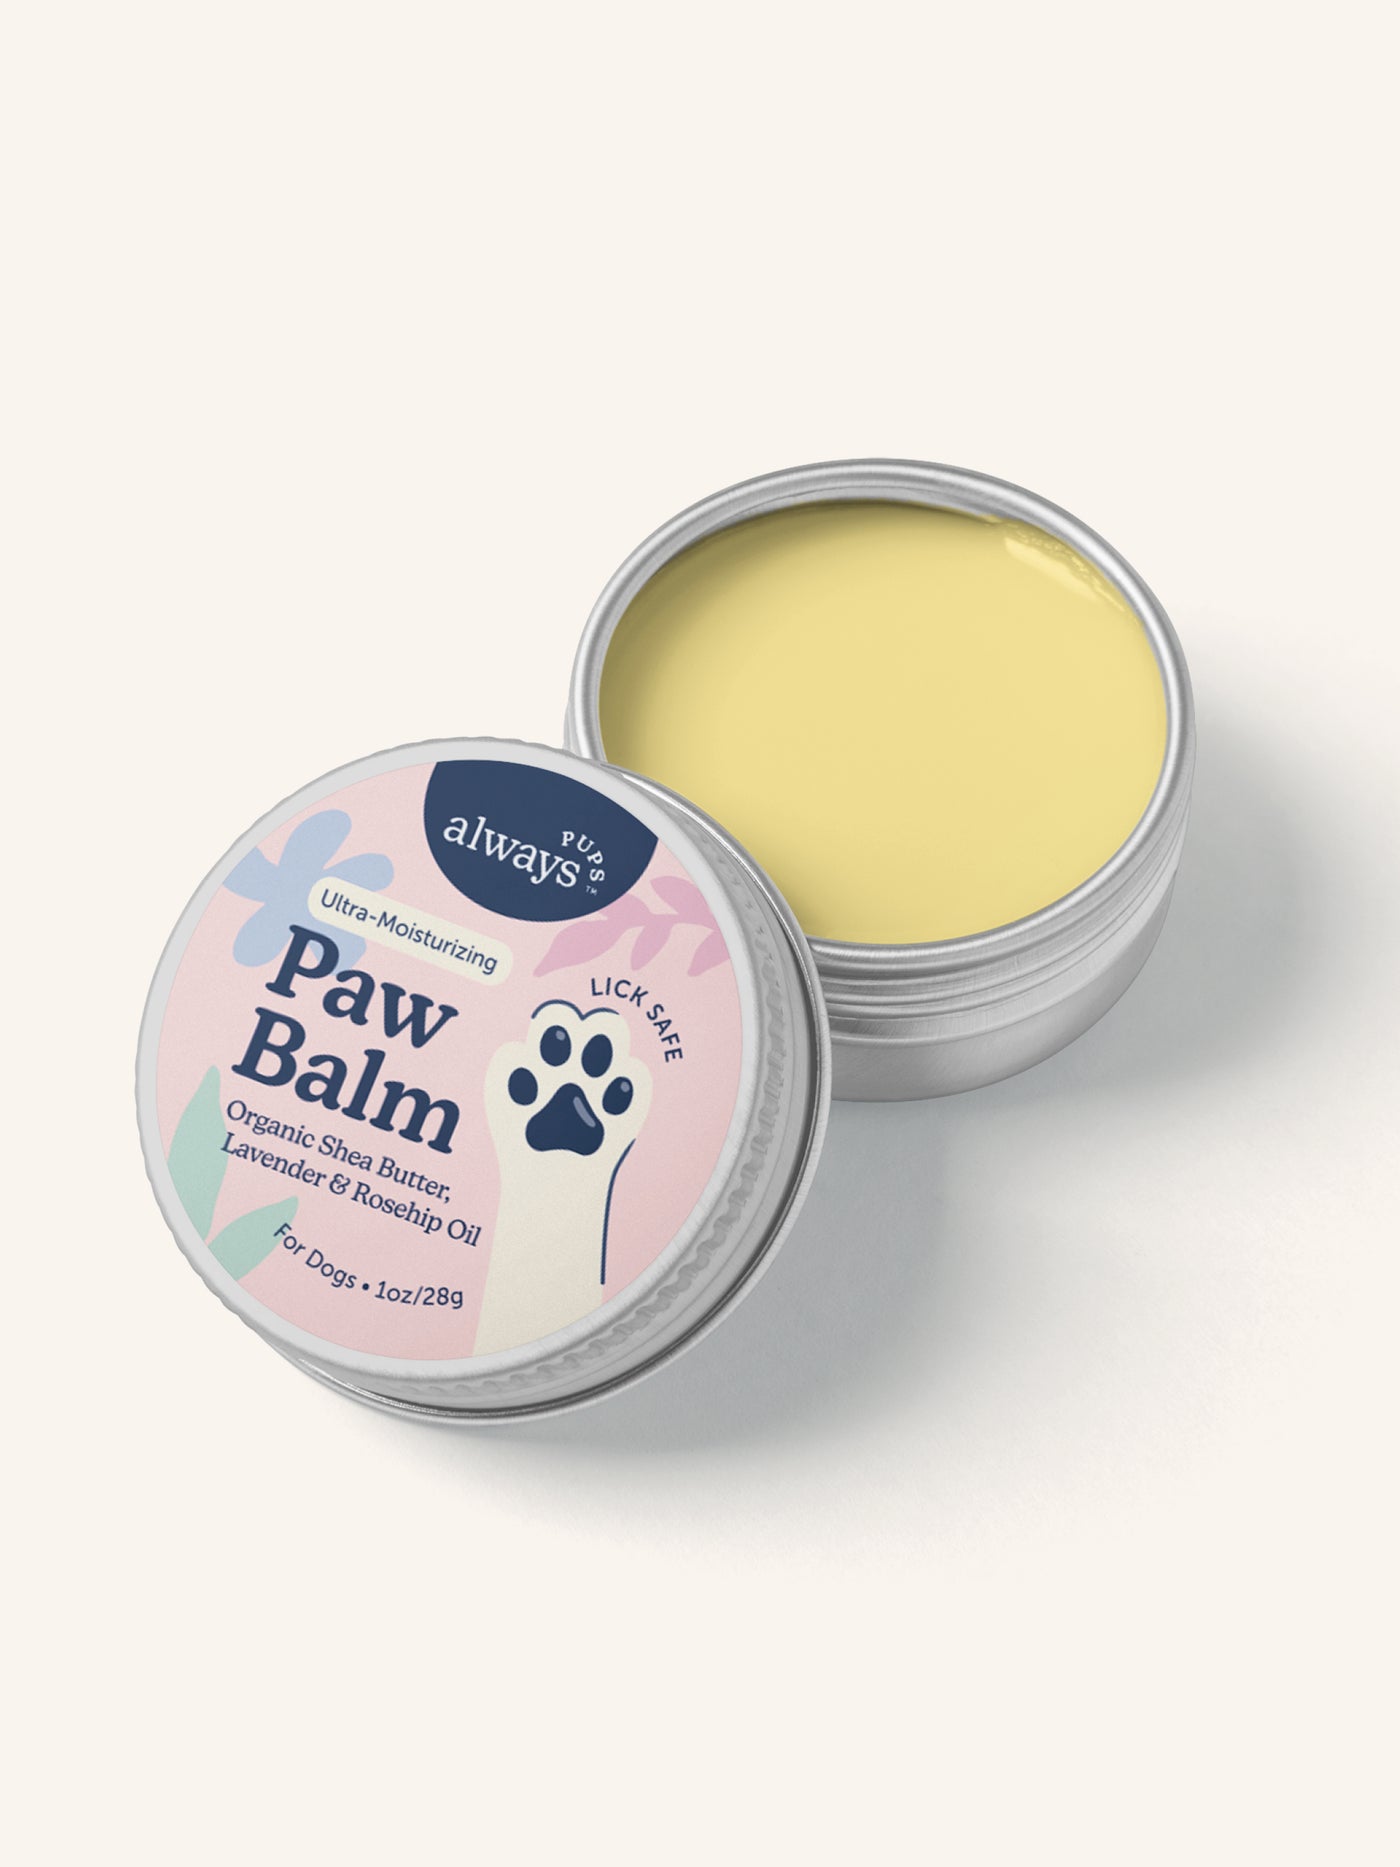 AlwaysPups All Natural Organic Paw Balm for Dogs - 1oz in a metal tin open and showing the content - light yellow balm